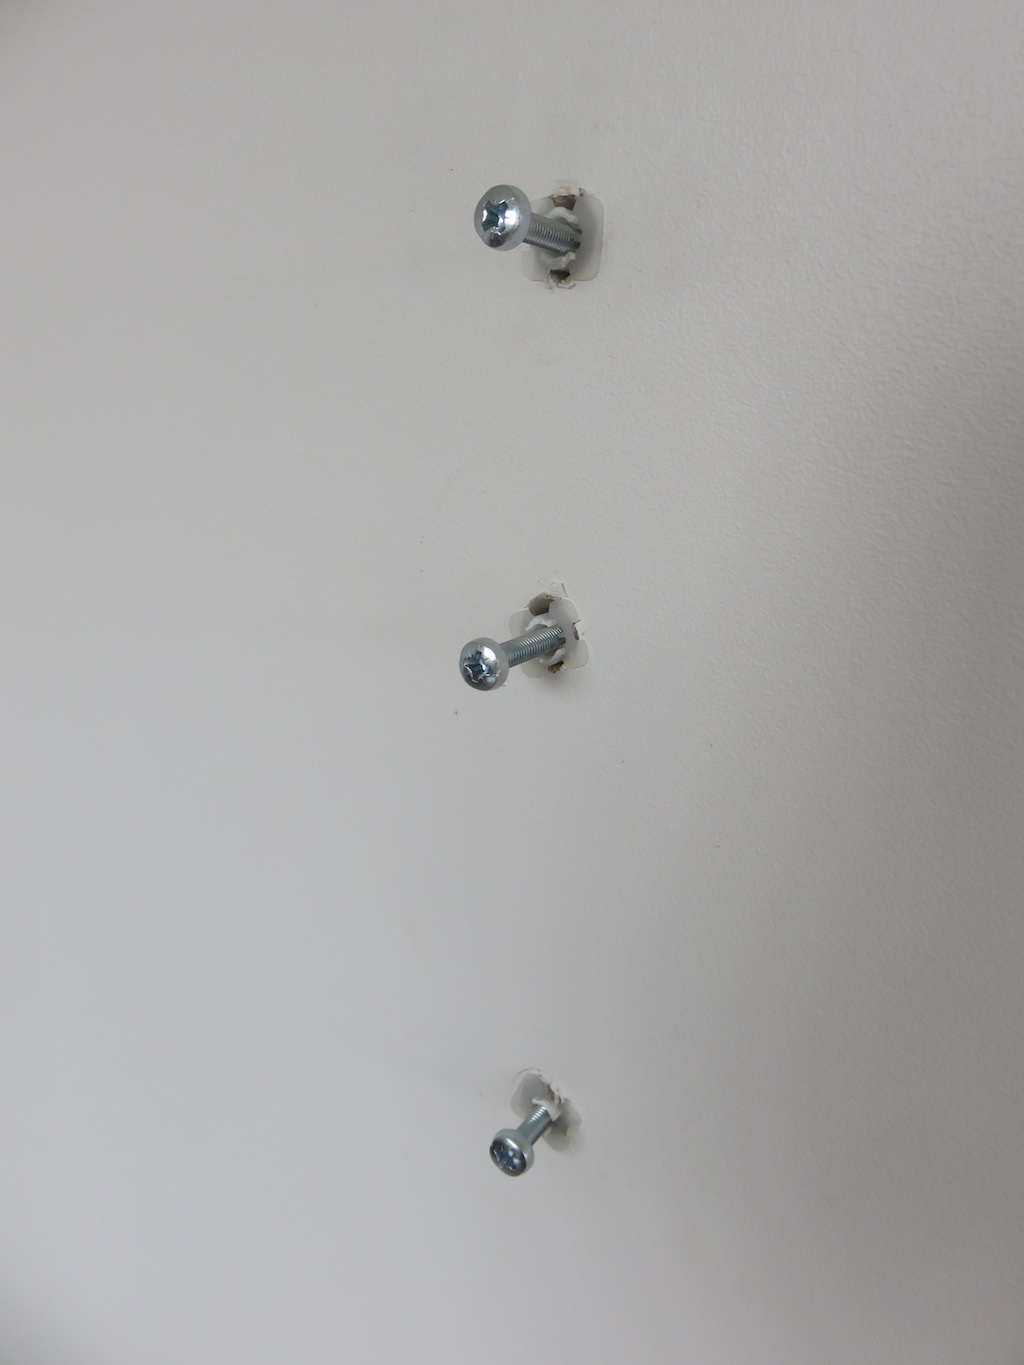 Three toggle bolts with plastic trimmed off.